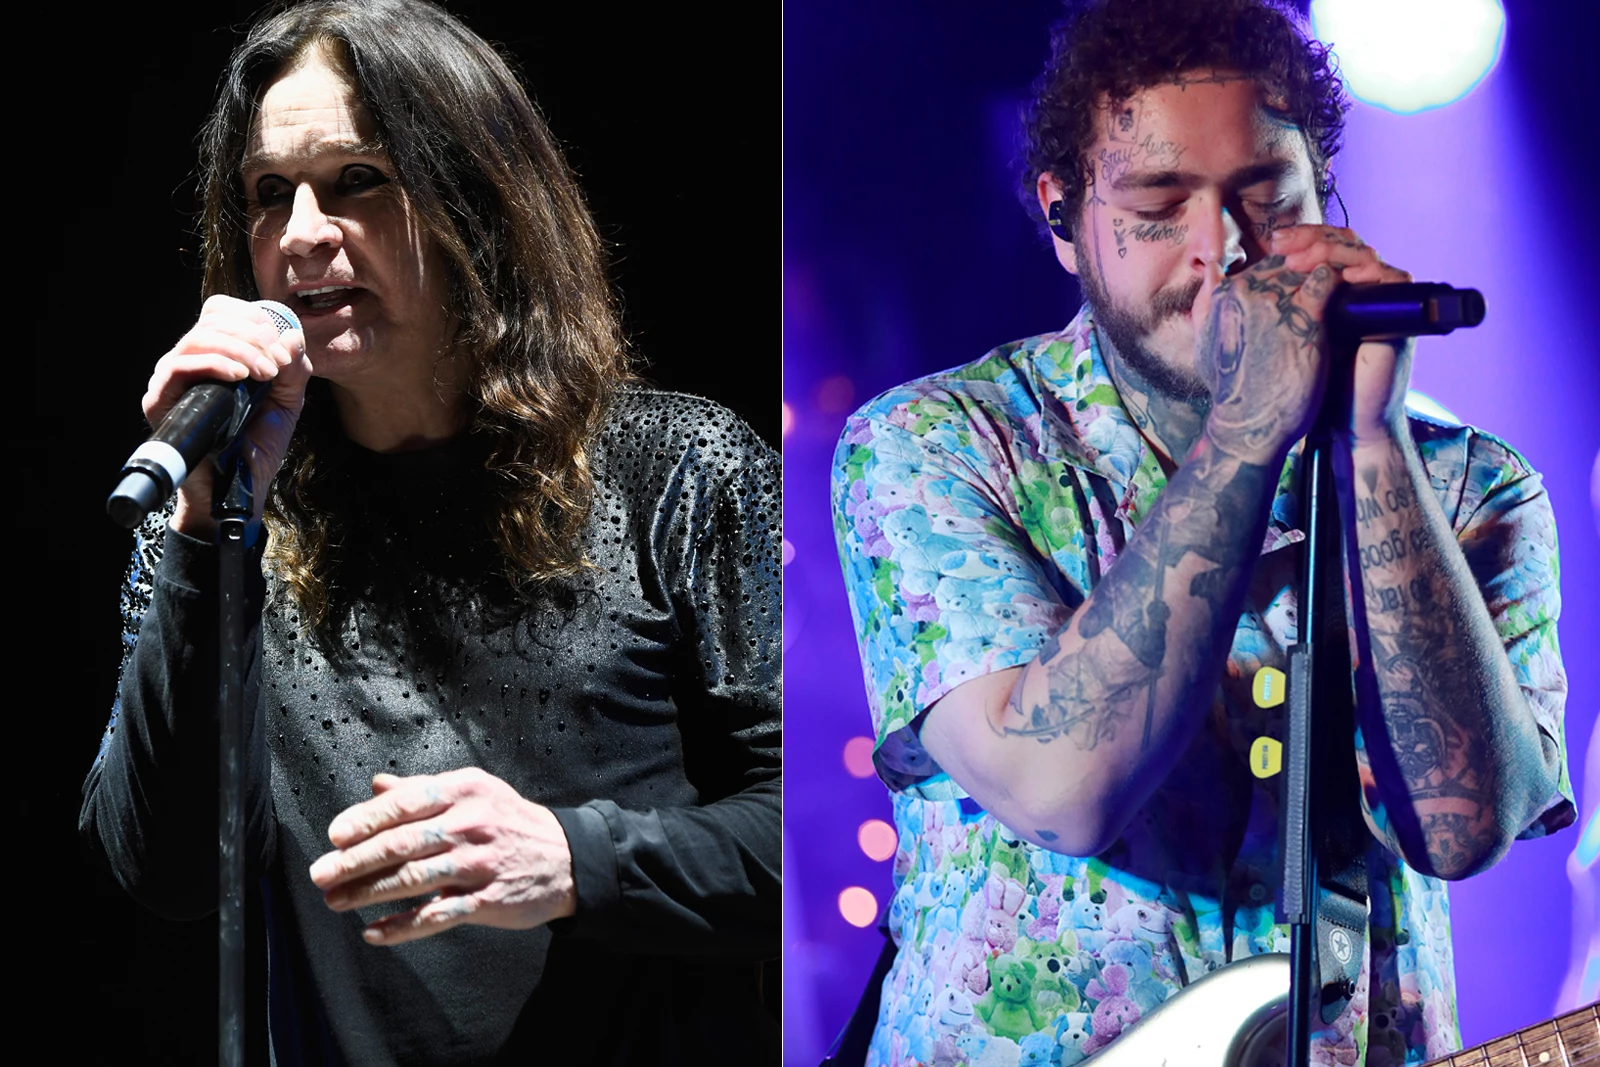 Hear Ozzy Osbourne Duet With Post Malone on 'Take What You Want'